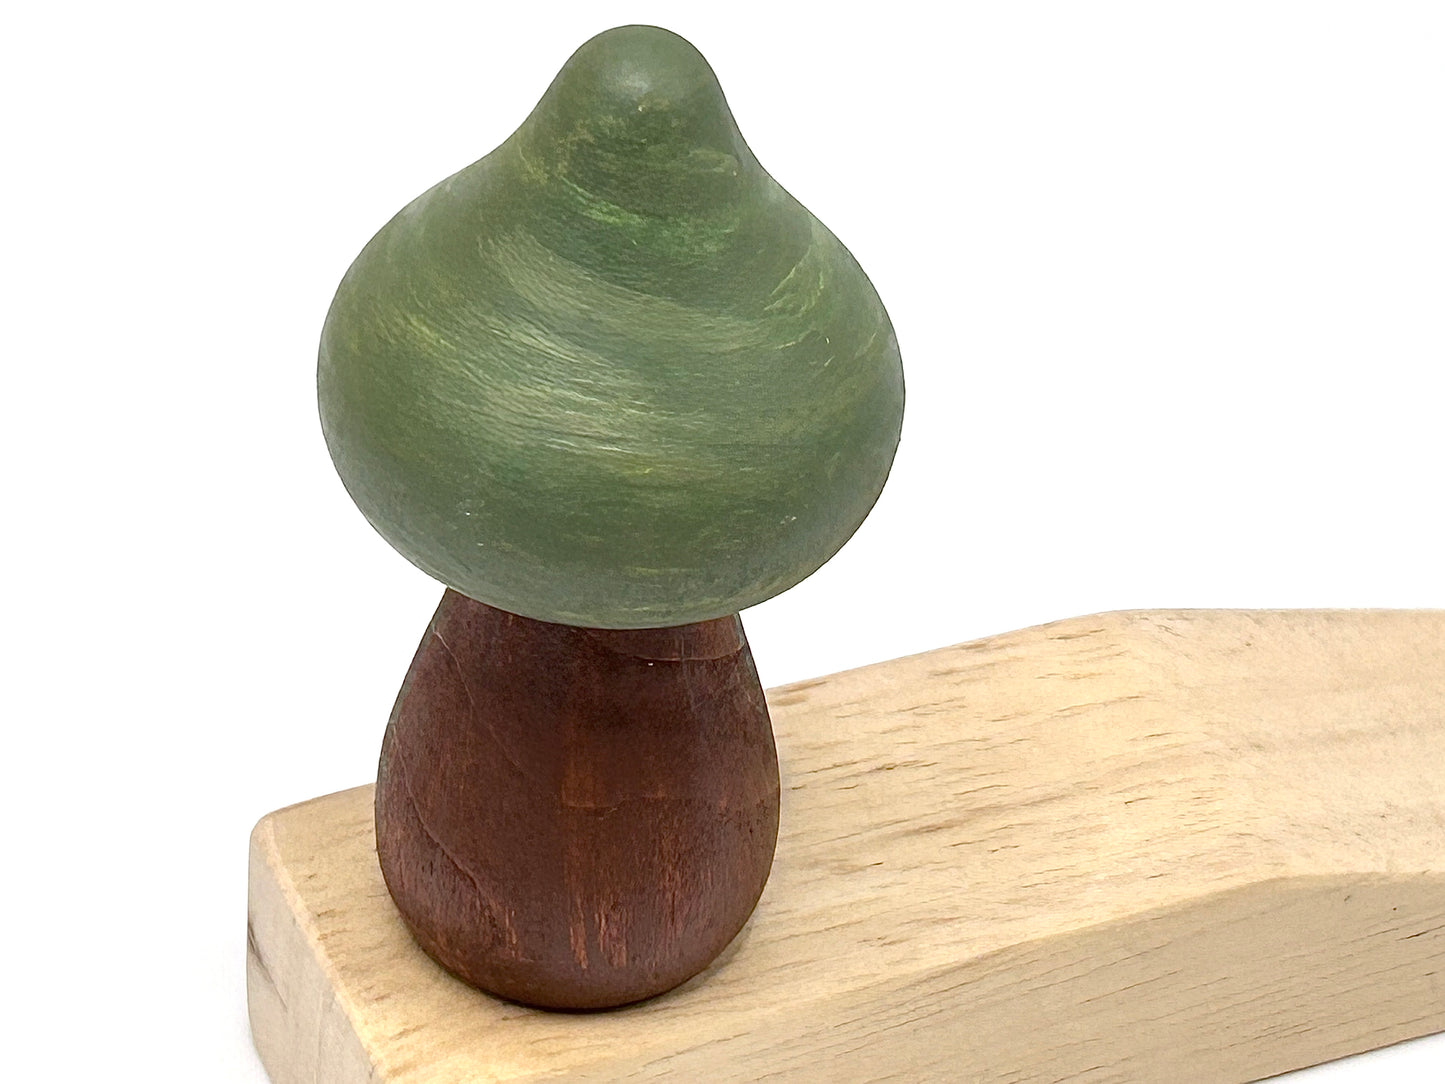 Enchanting Whimsy: Doorstop with Creative Woodcarve Mushroom Ornament